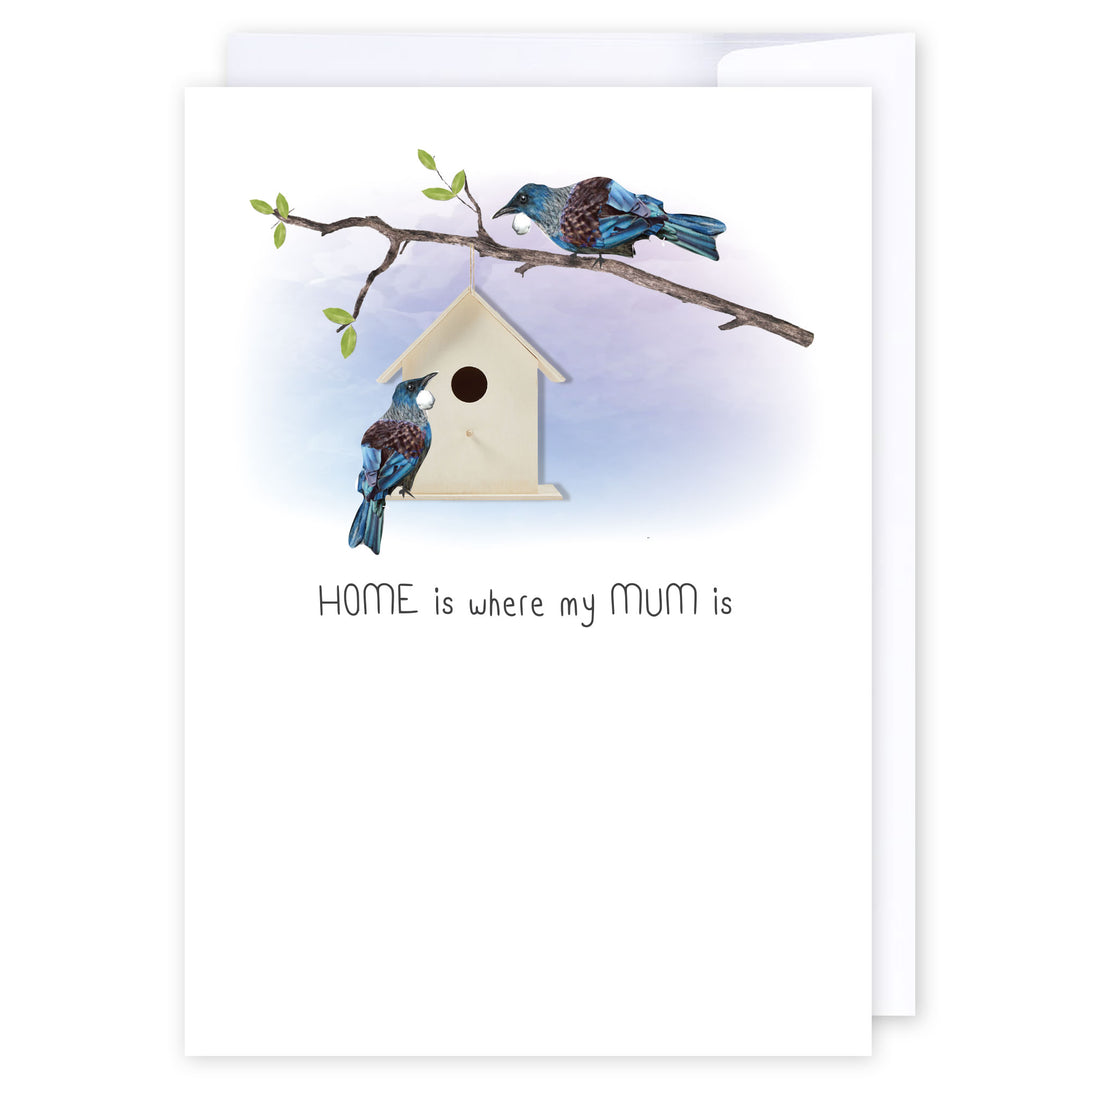 Home is where my mum is - Tui